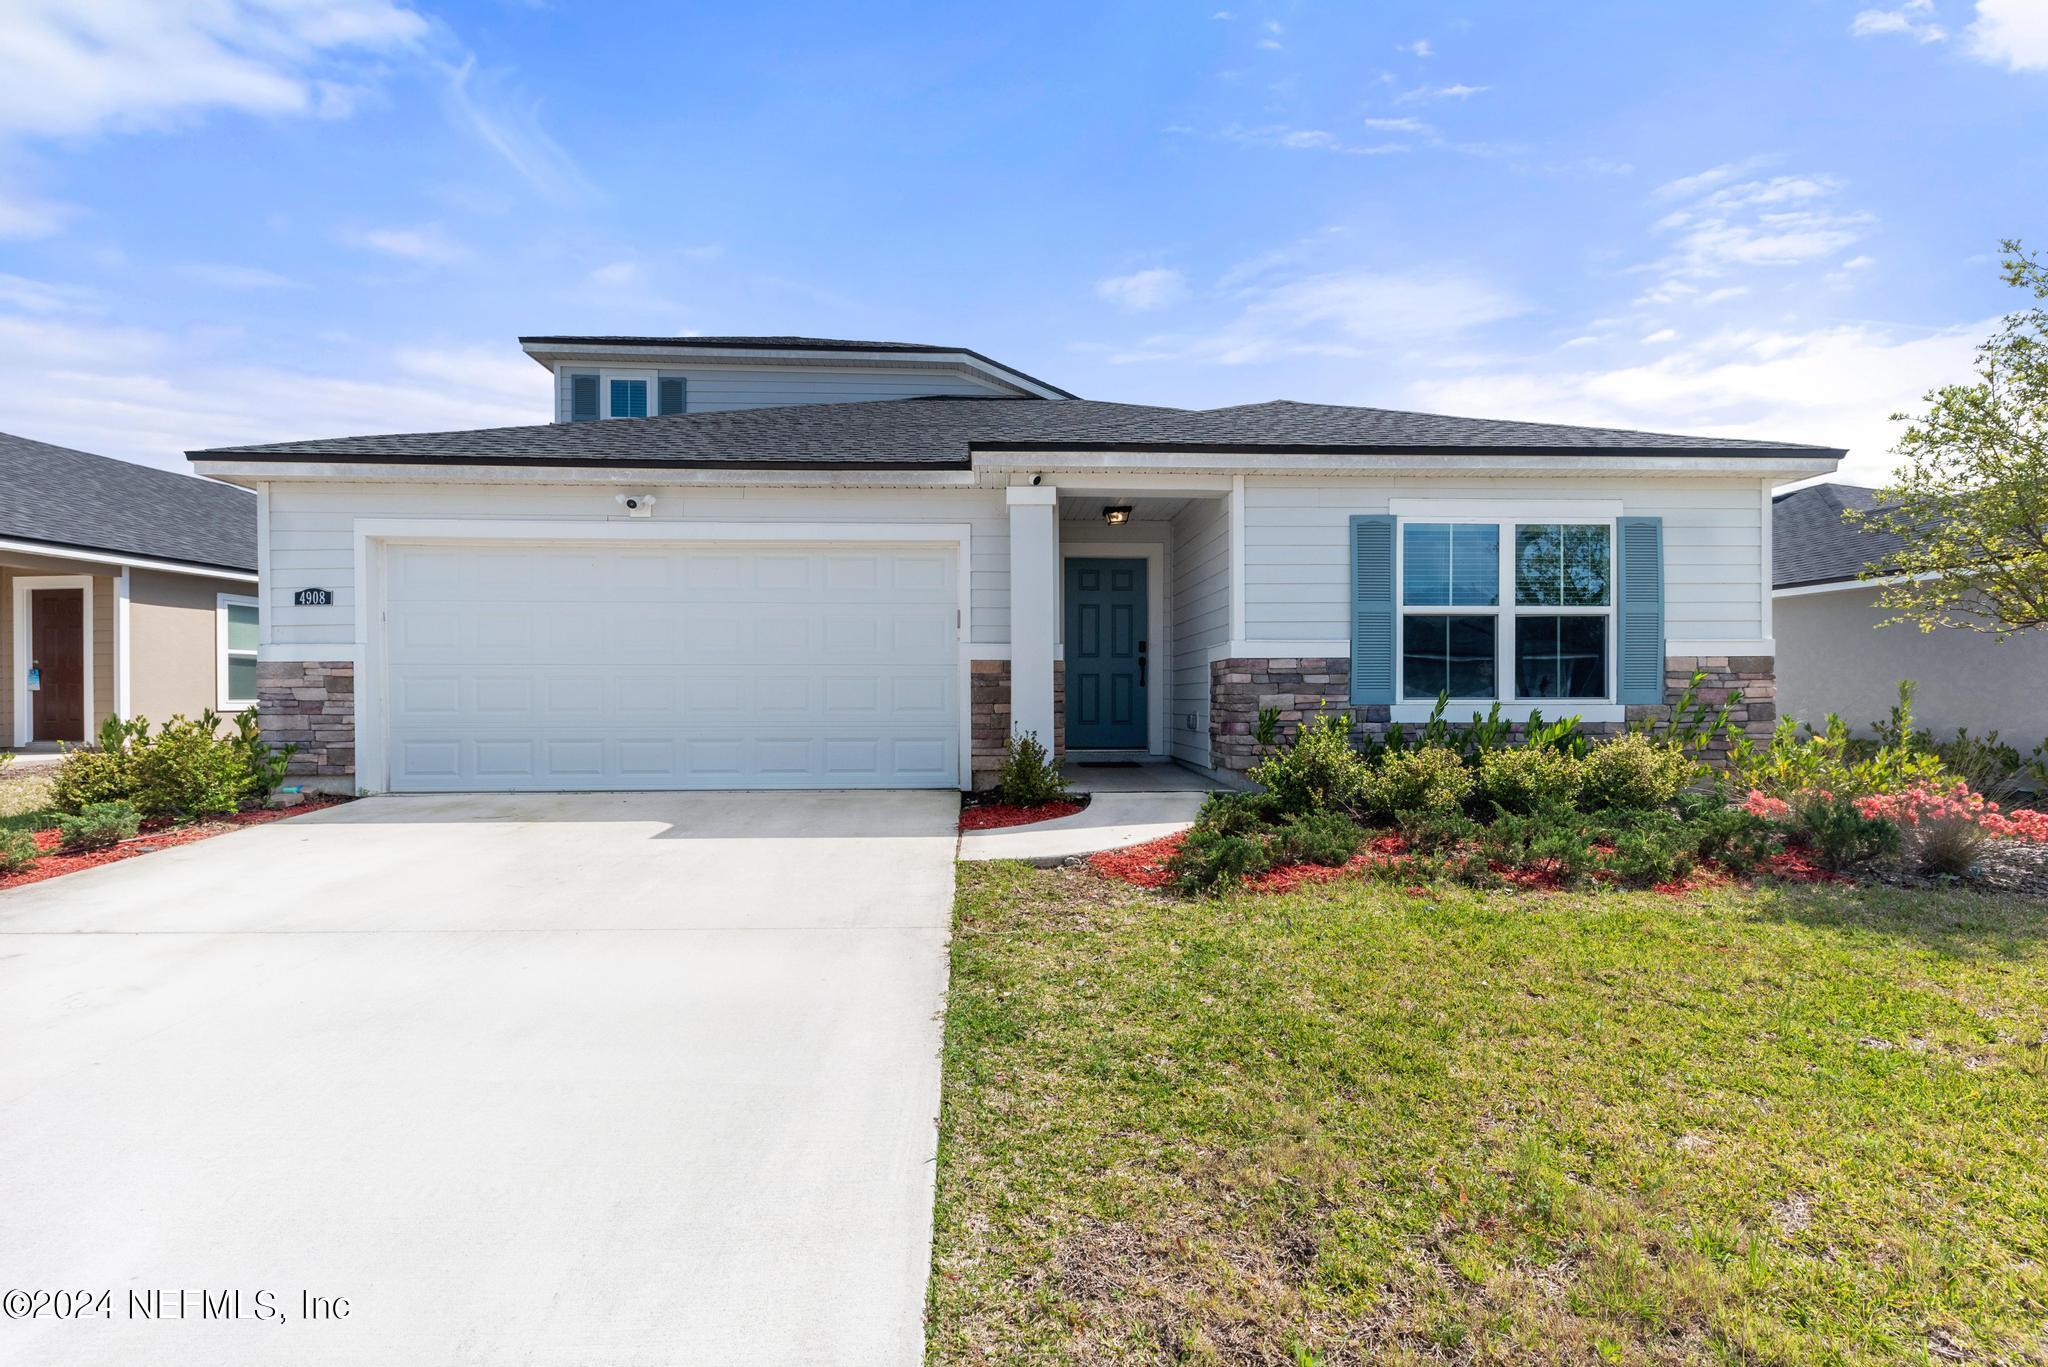 Jacksonville, FL home for sale located at 4908 Morning Rise Circle, Jacksonville, FL 32218